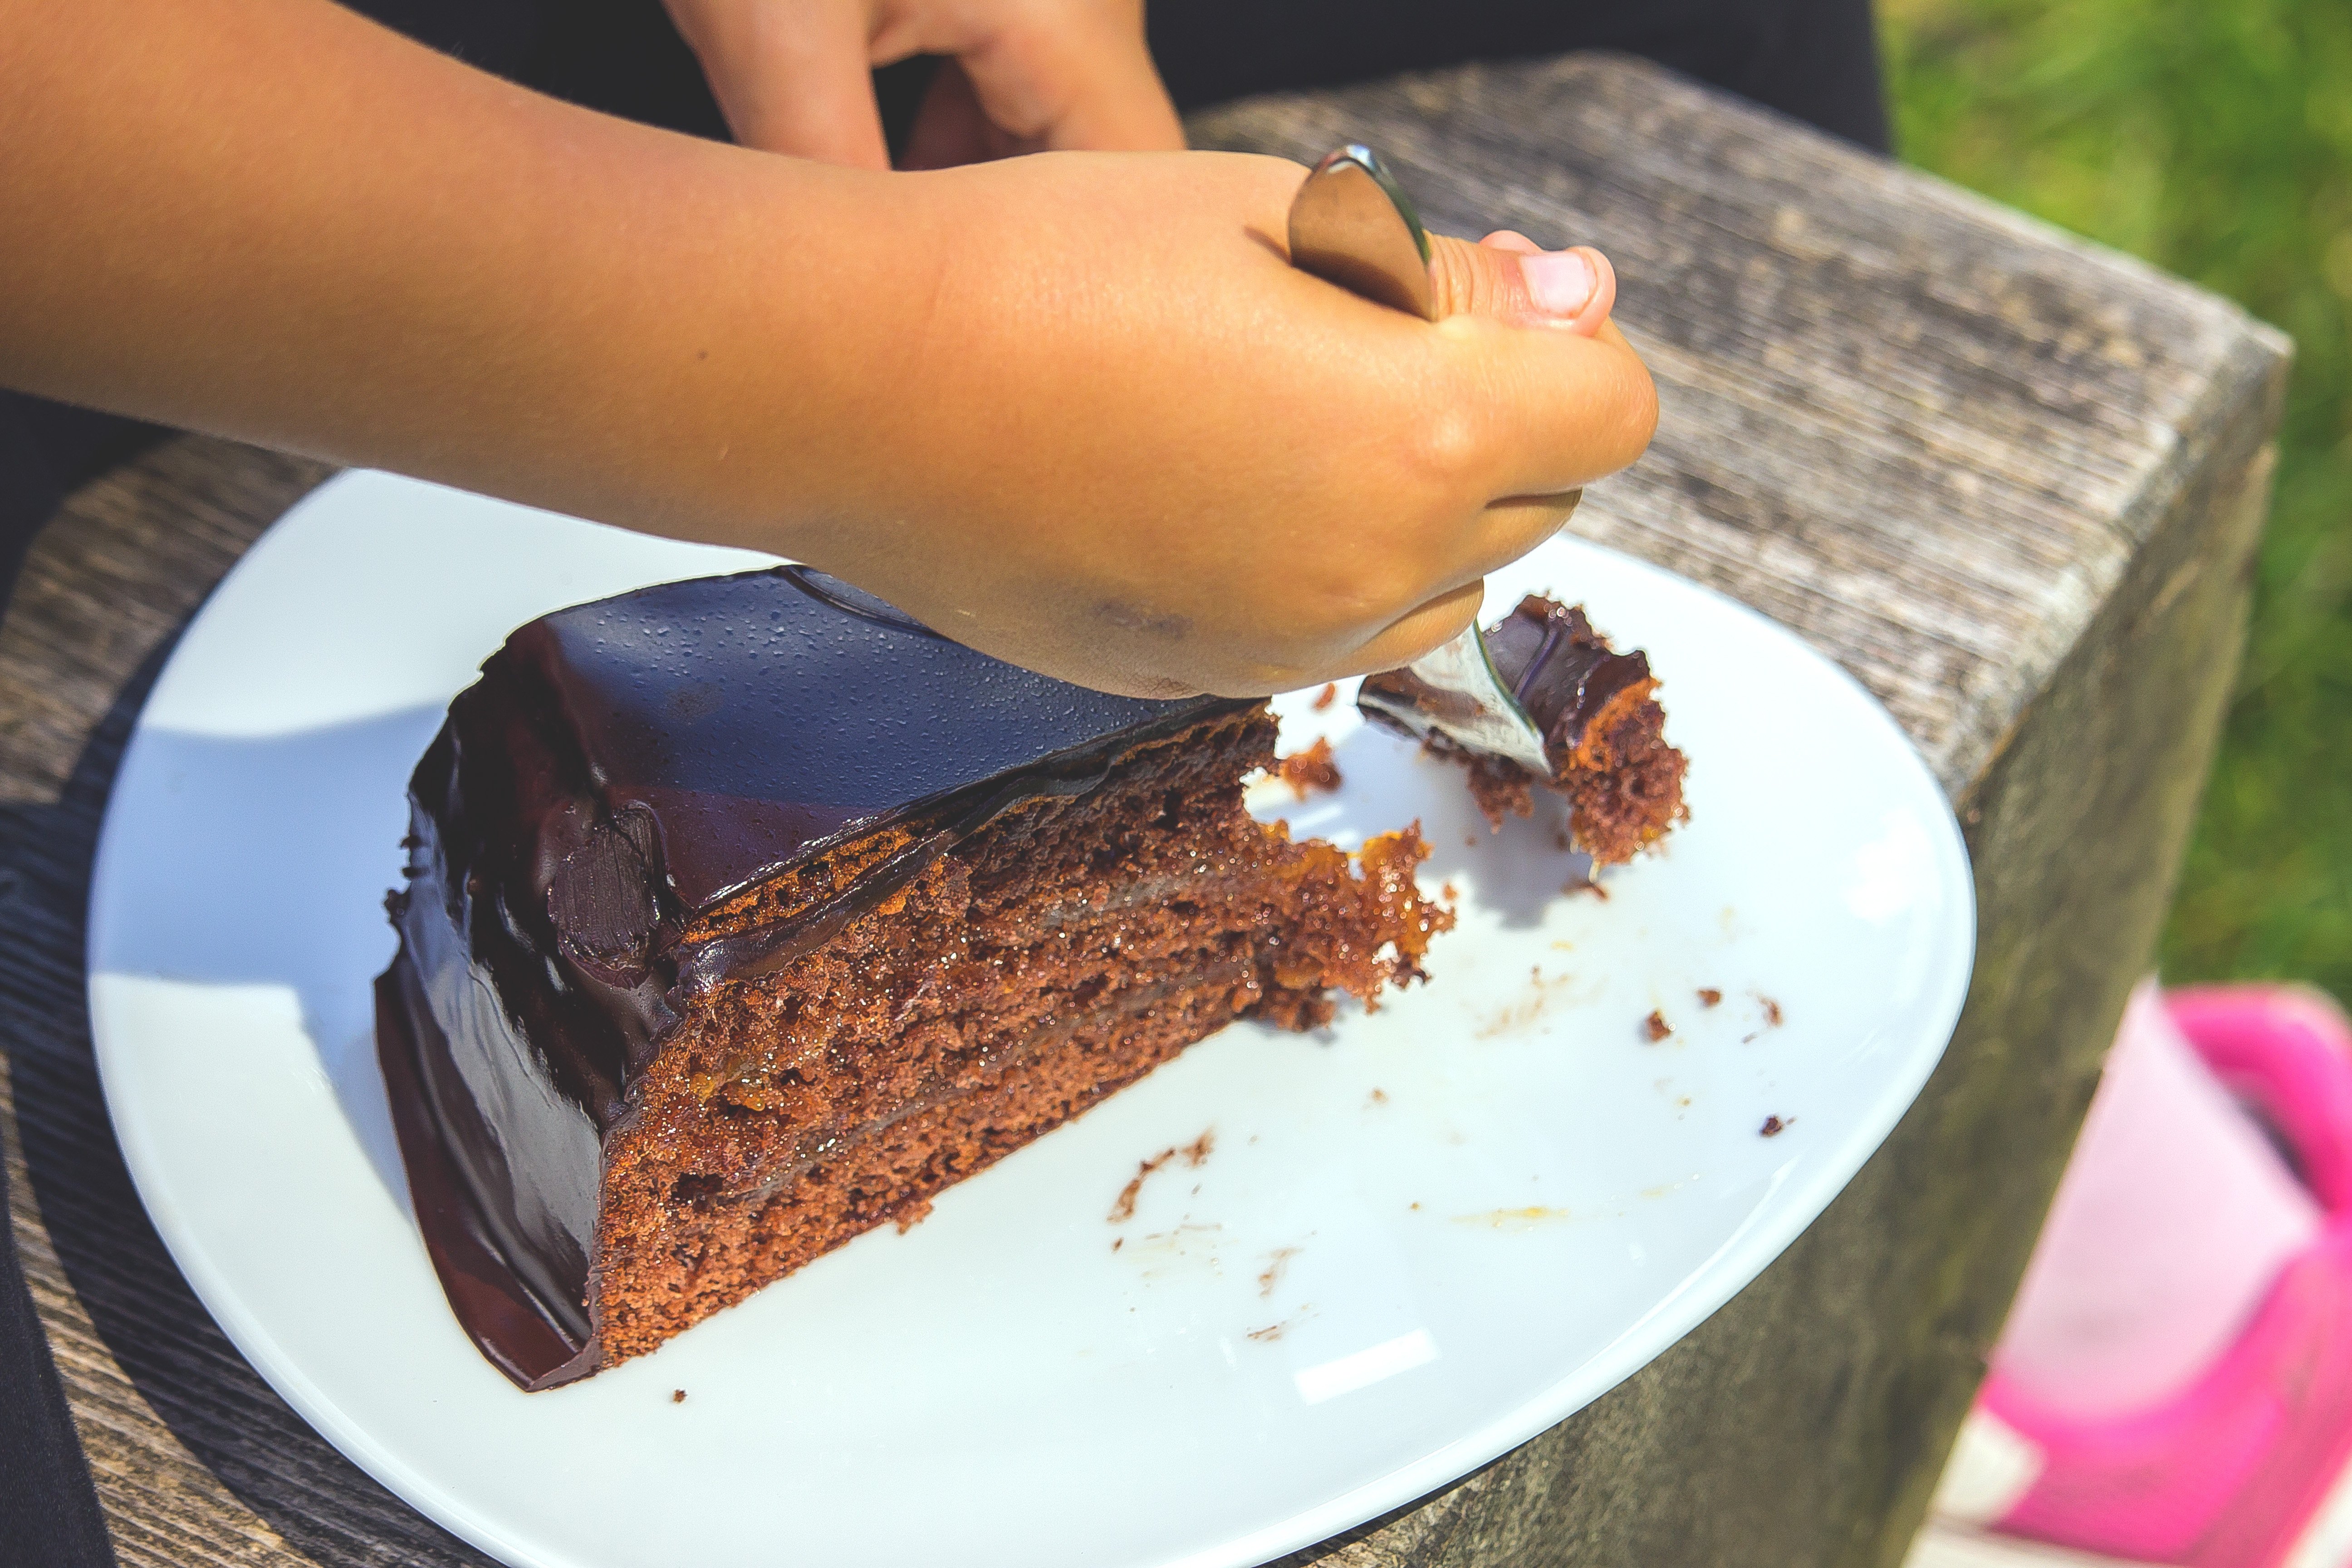 A person cutting into a chocolate cake on top of a white plate.